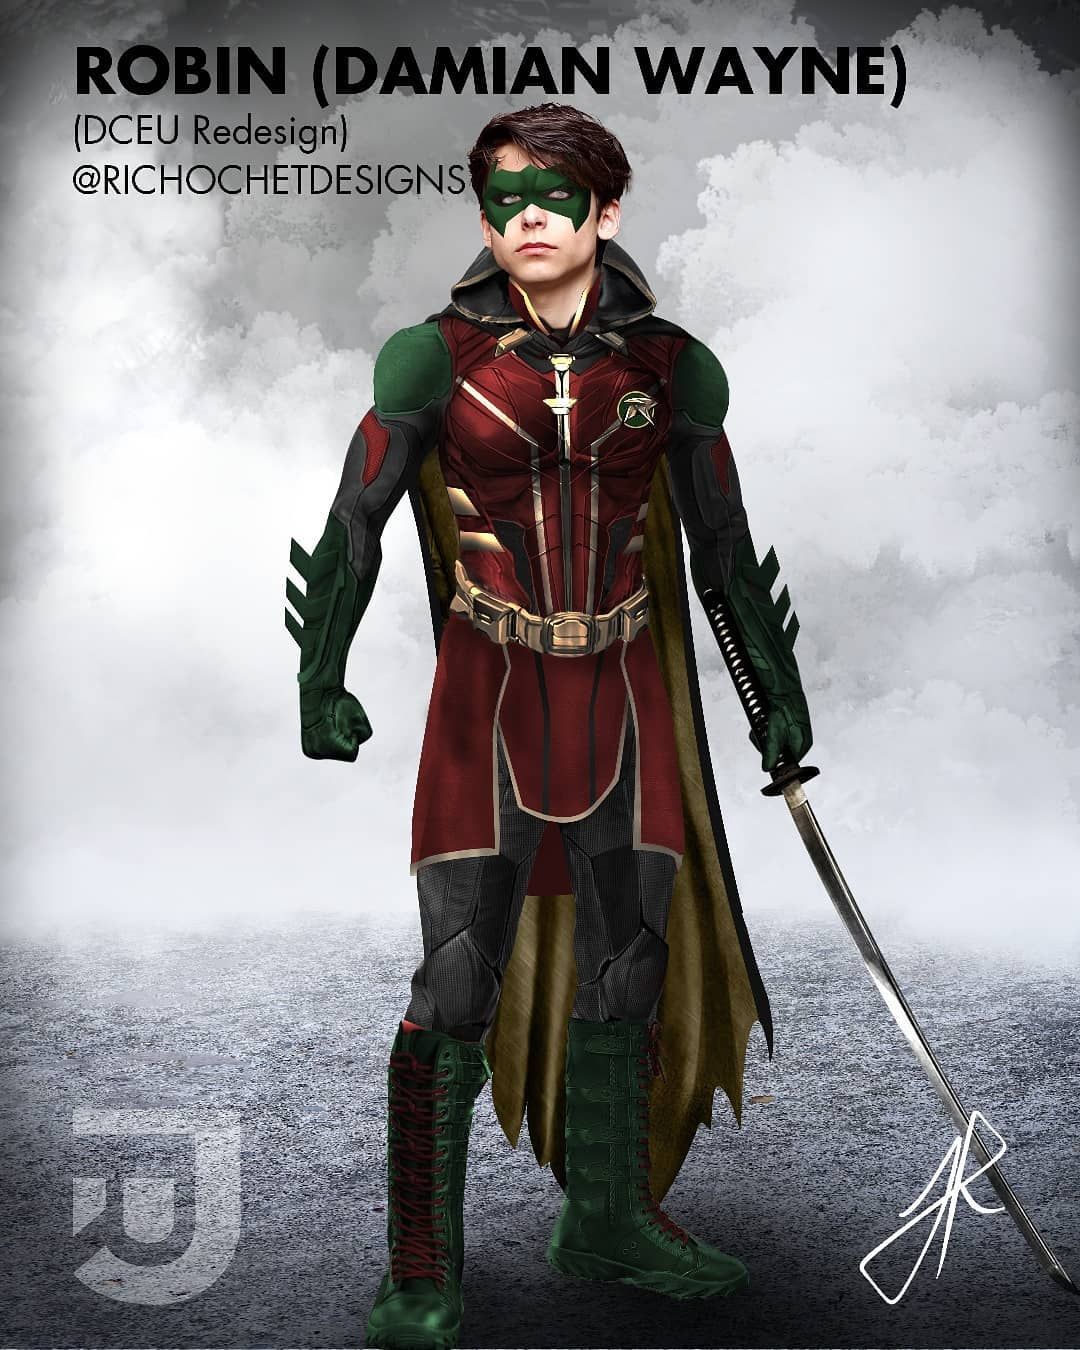 Richochet Designs posted on Instagram: “ROBIN DAMIAN WAYNE suit concept for a DCEU Reboot. Aida. Robin suit, Damian wayne batman, Damian wayne